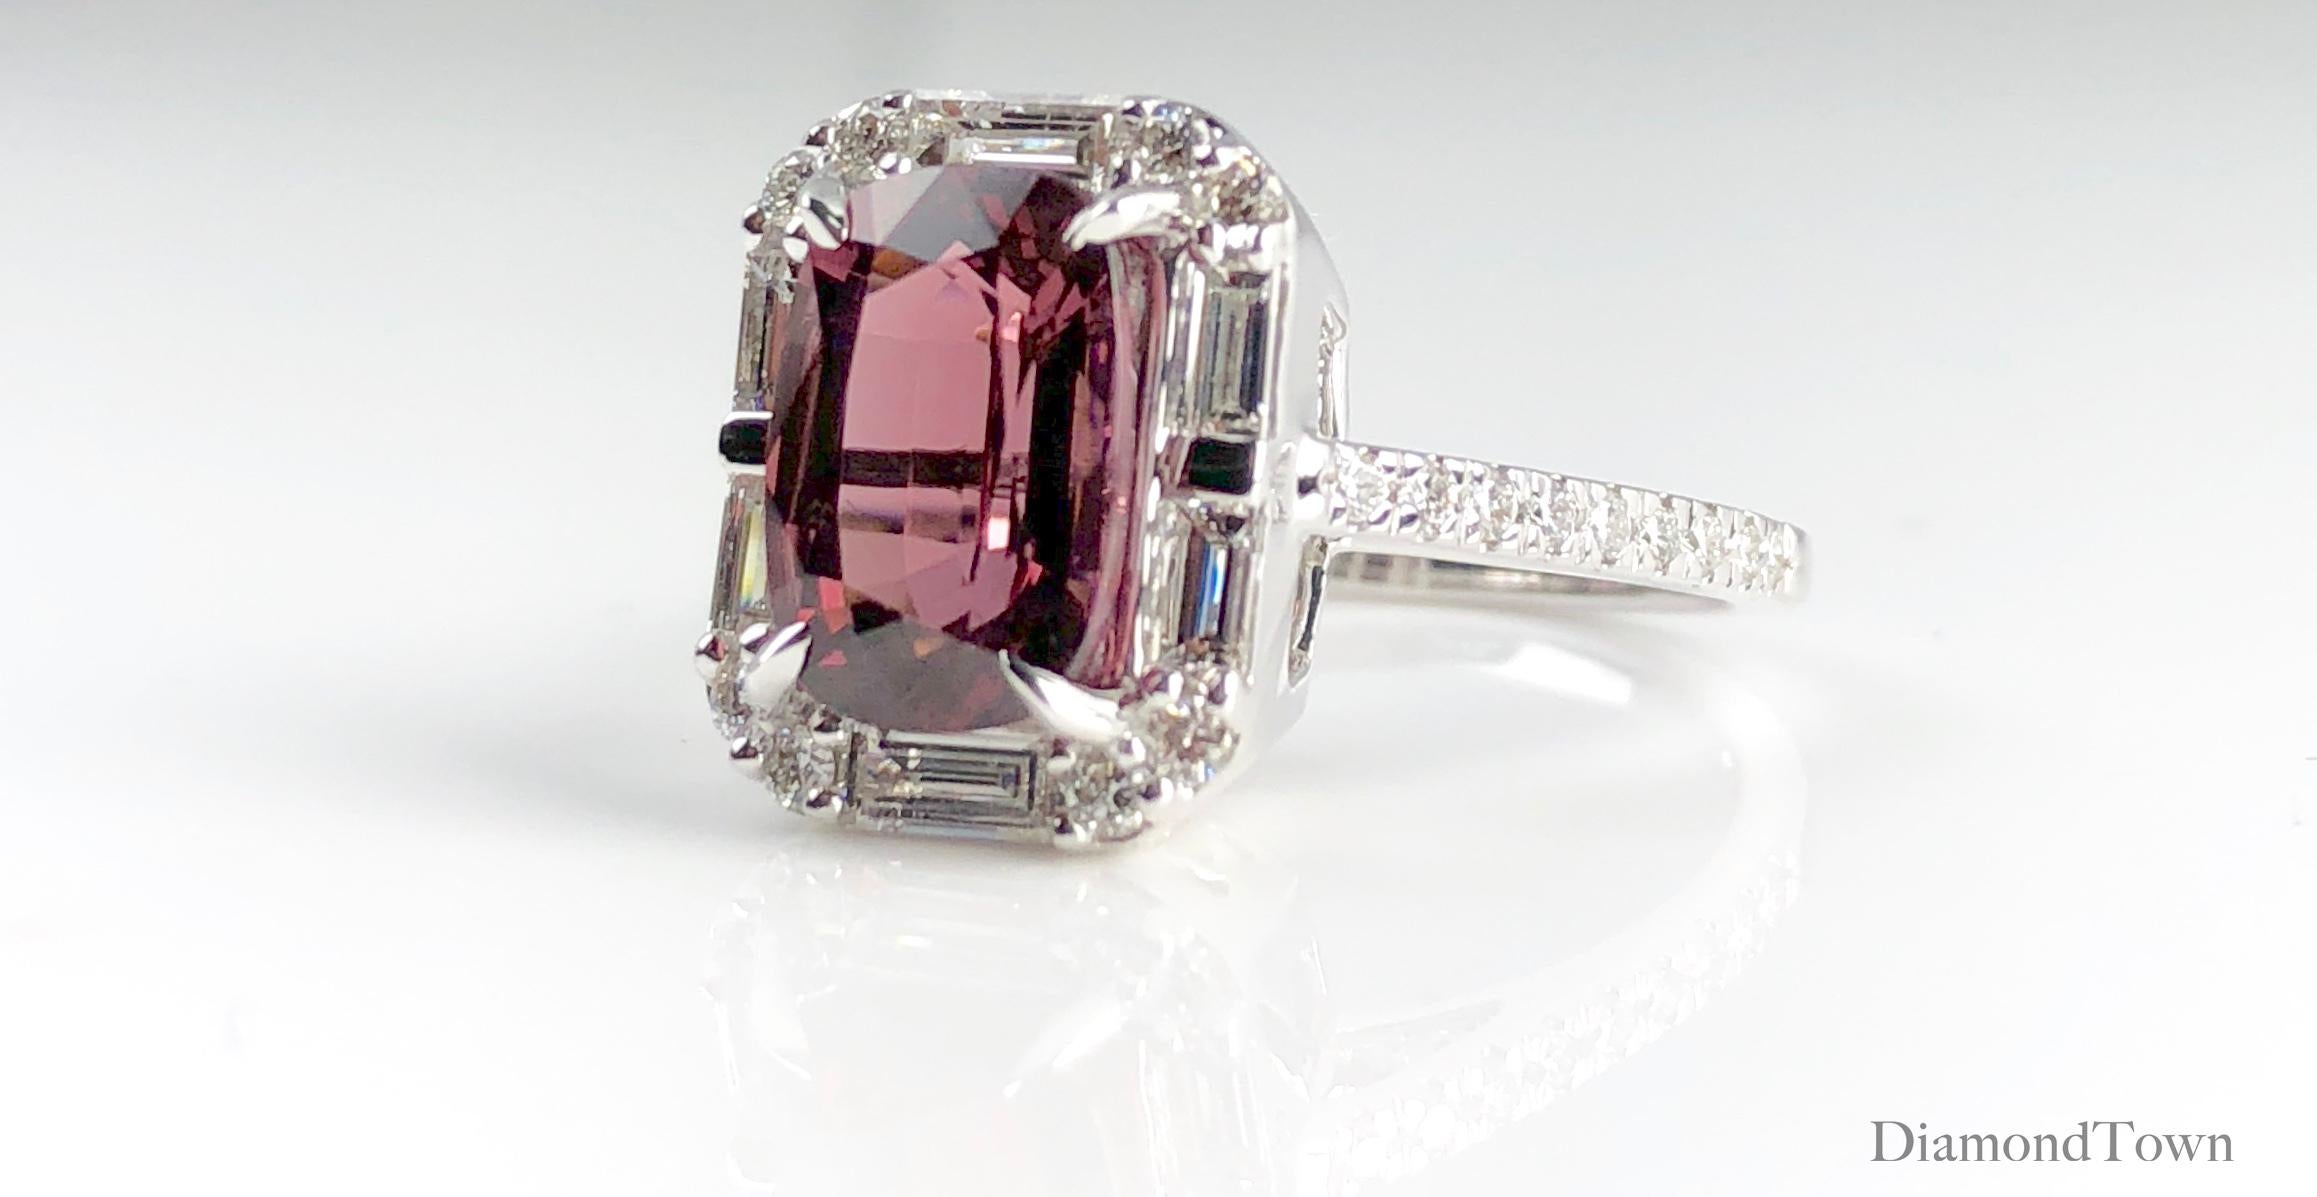 This beautiful ring features a 4.95 carat cushion cut Raspberry Garnet center, surrounded by a halo of baguette  and round diamonds. Additional round diamonds trace down the side shank, bringing the total diamond weight to 1.19 carats.

Ring size